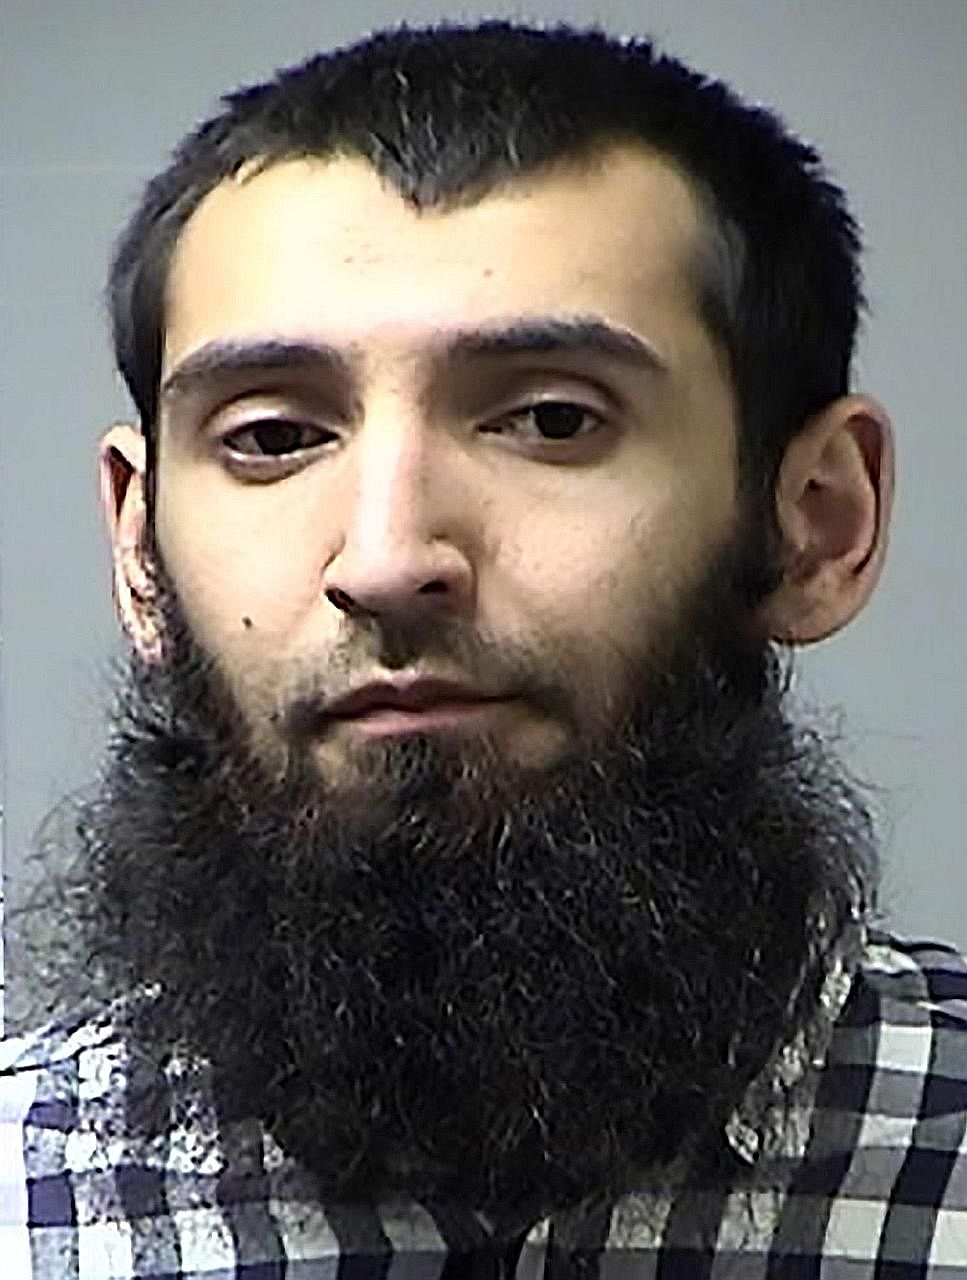 Sayfullo Saipov went to the US in 2010, from Uzbekistan. And he had earned a green card, said a law enforcement official.